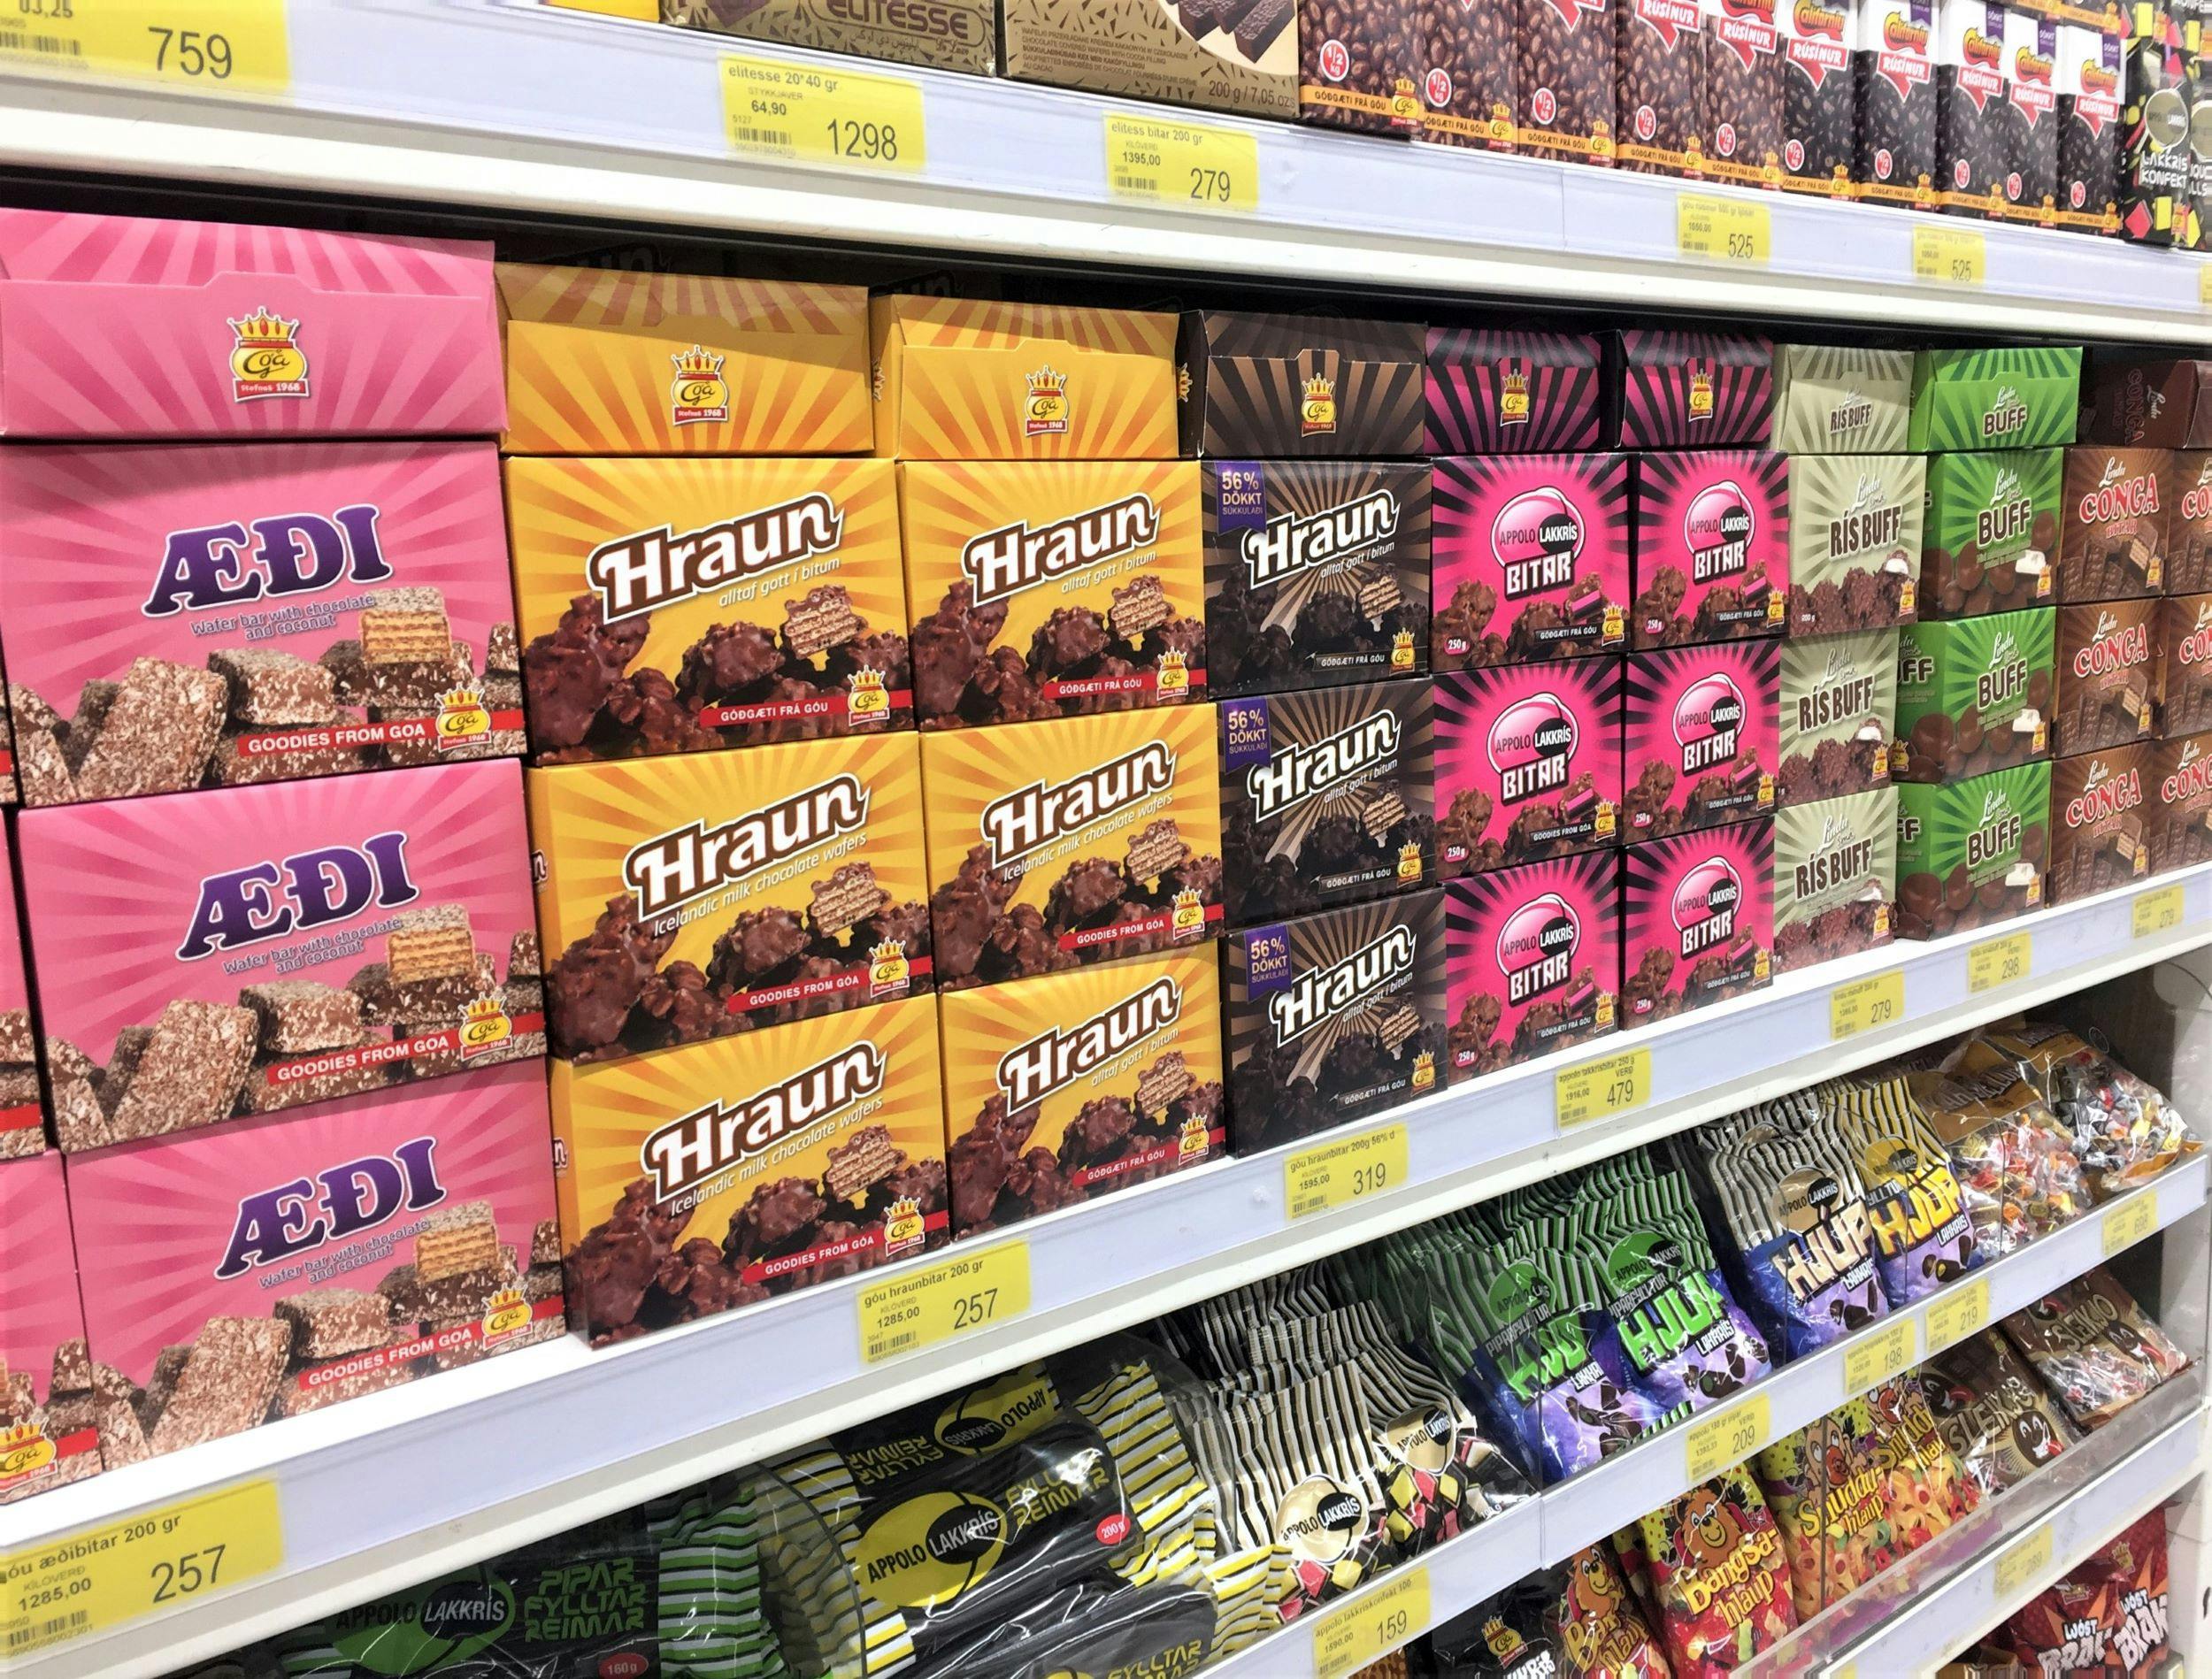 Shelf in an Icelandic supermarket filled with Icelandic candy